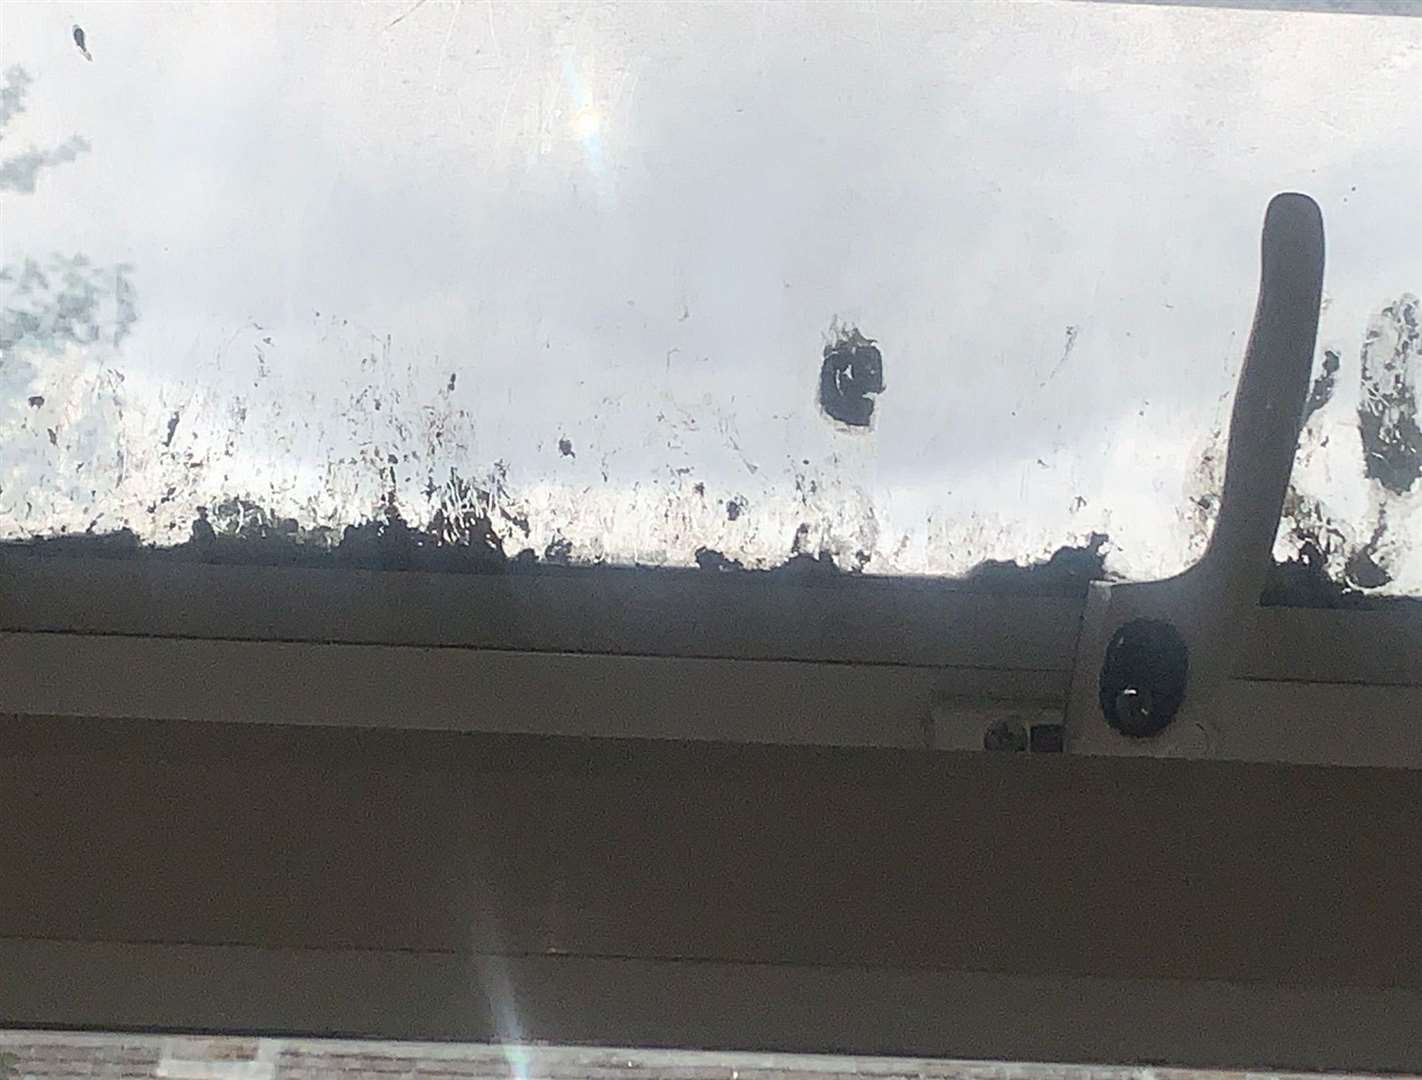 Mould on the window spotted by mum Gemma McDonald when viewing the property